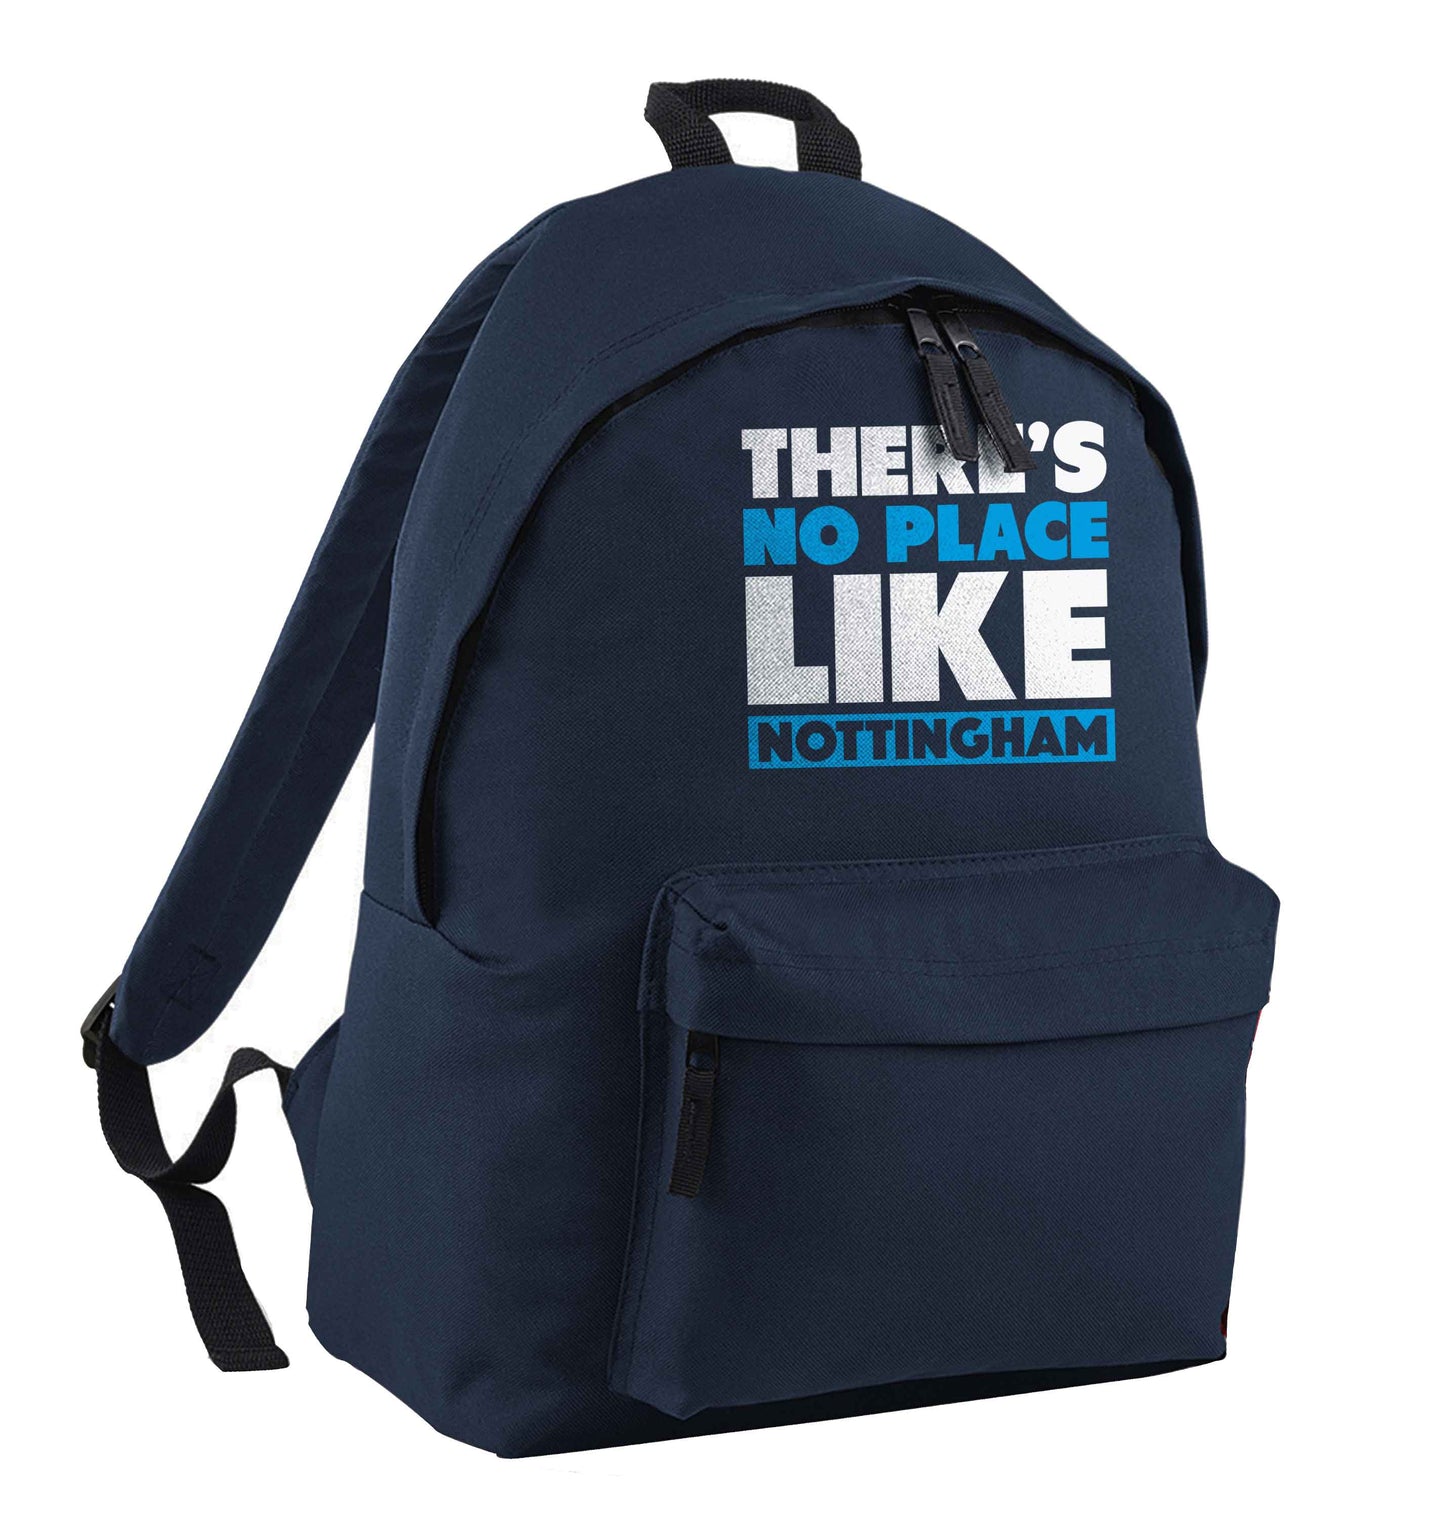 There's no place like Nottingham navy children's backpack